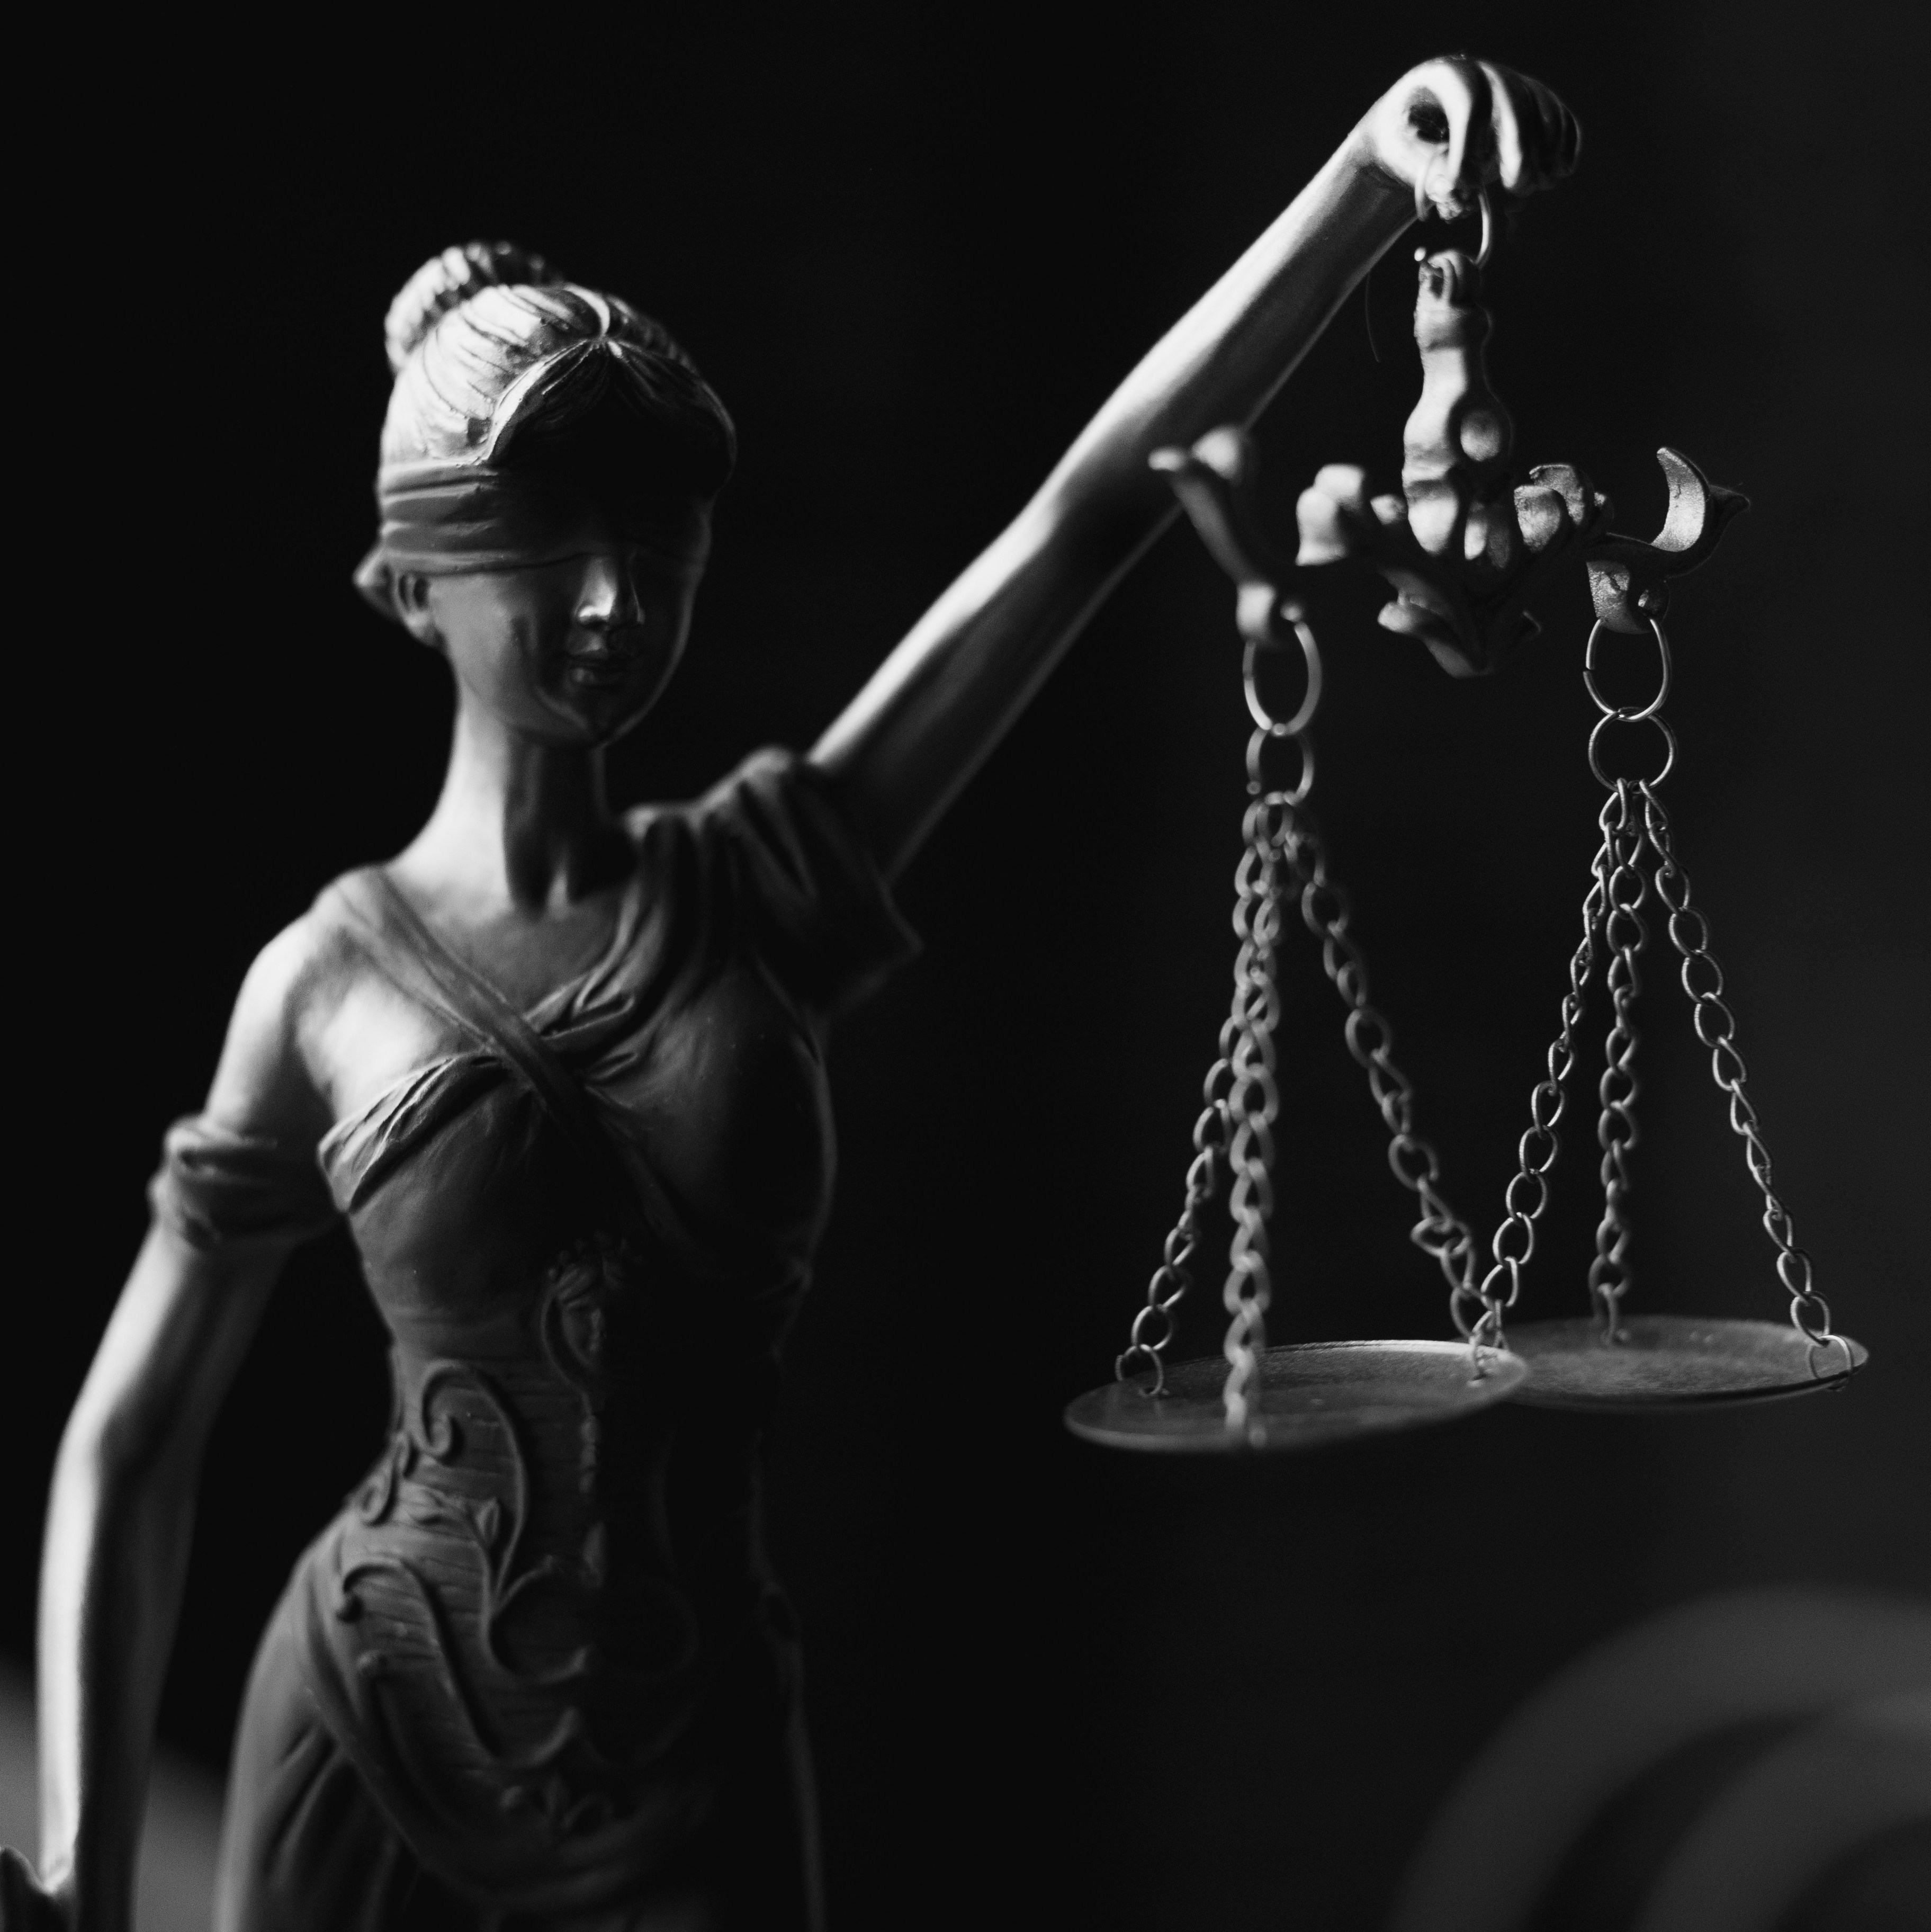 https://www.pexels.com/photo/a-grayscale-of-a-lady-justice-figurine-6077181/